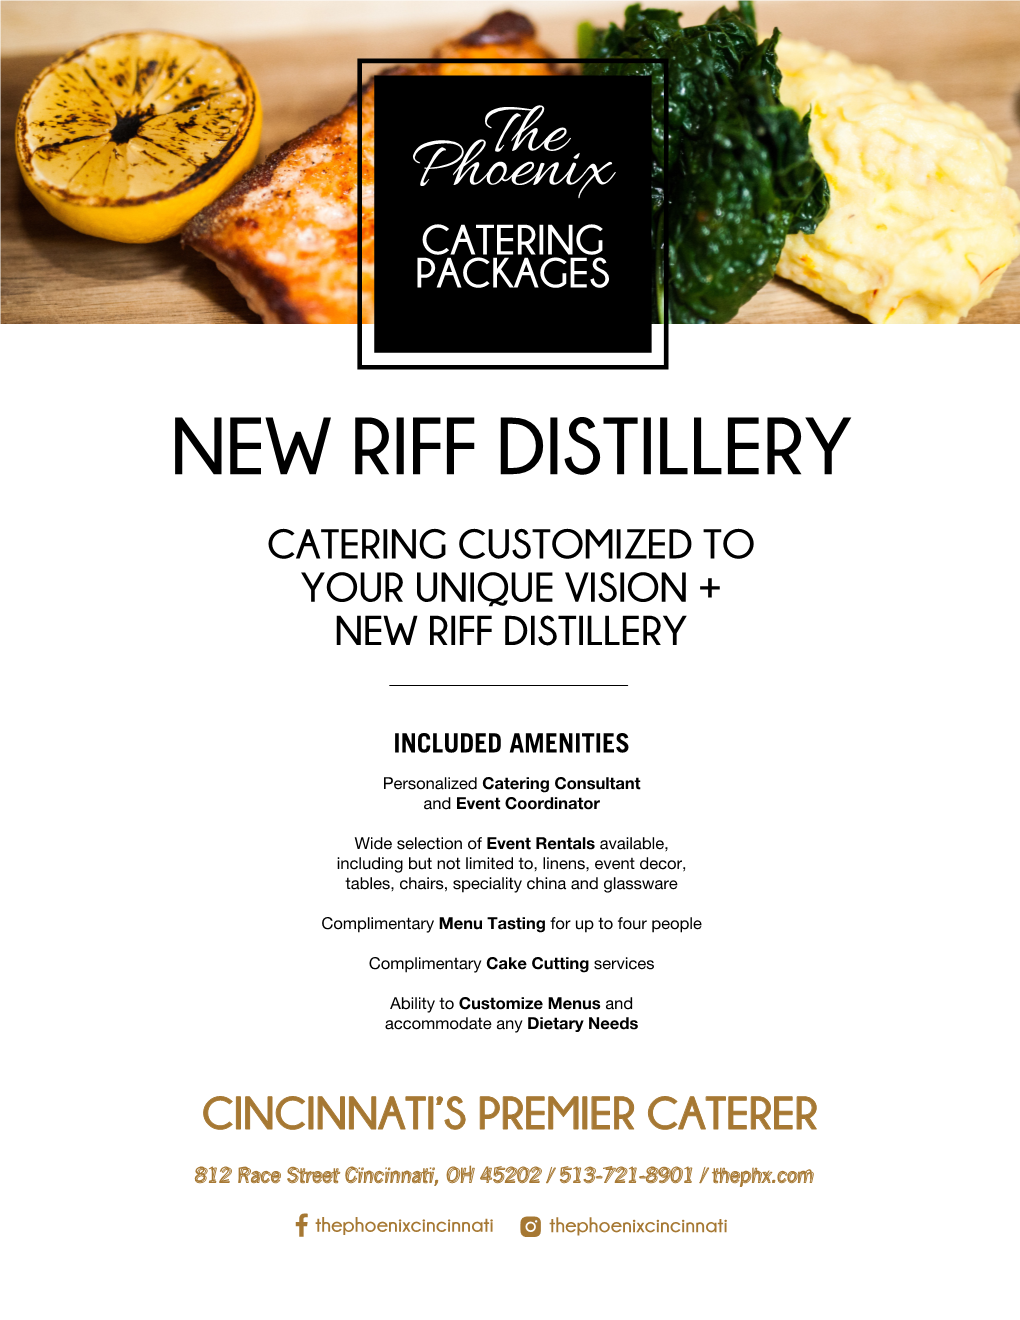 New Riff Distillery Catering Customized to Your Unique Vision + New Riff Distillery